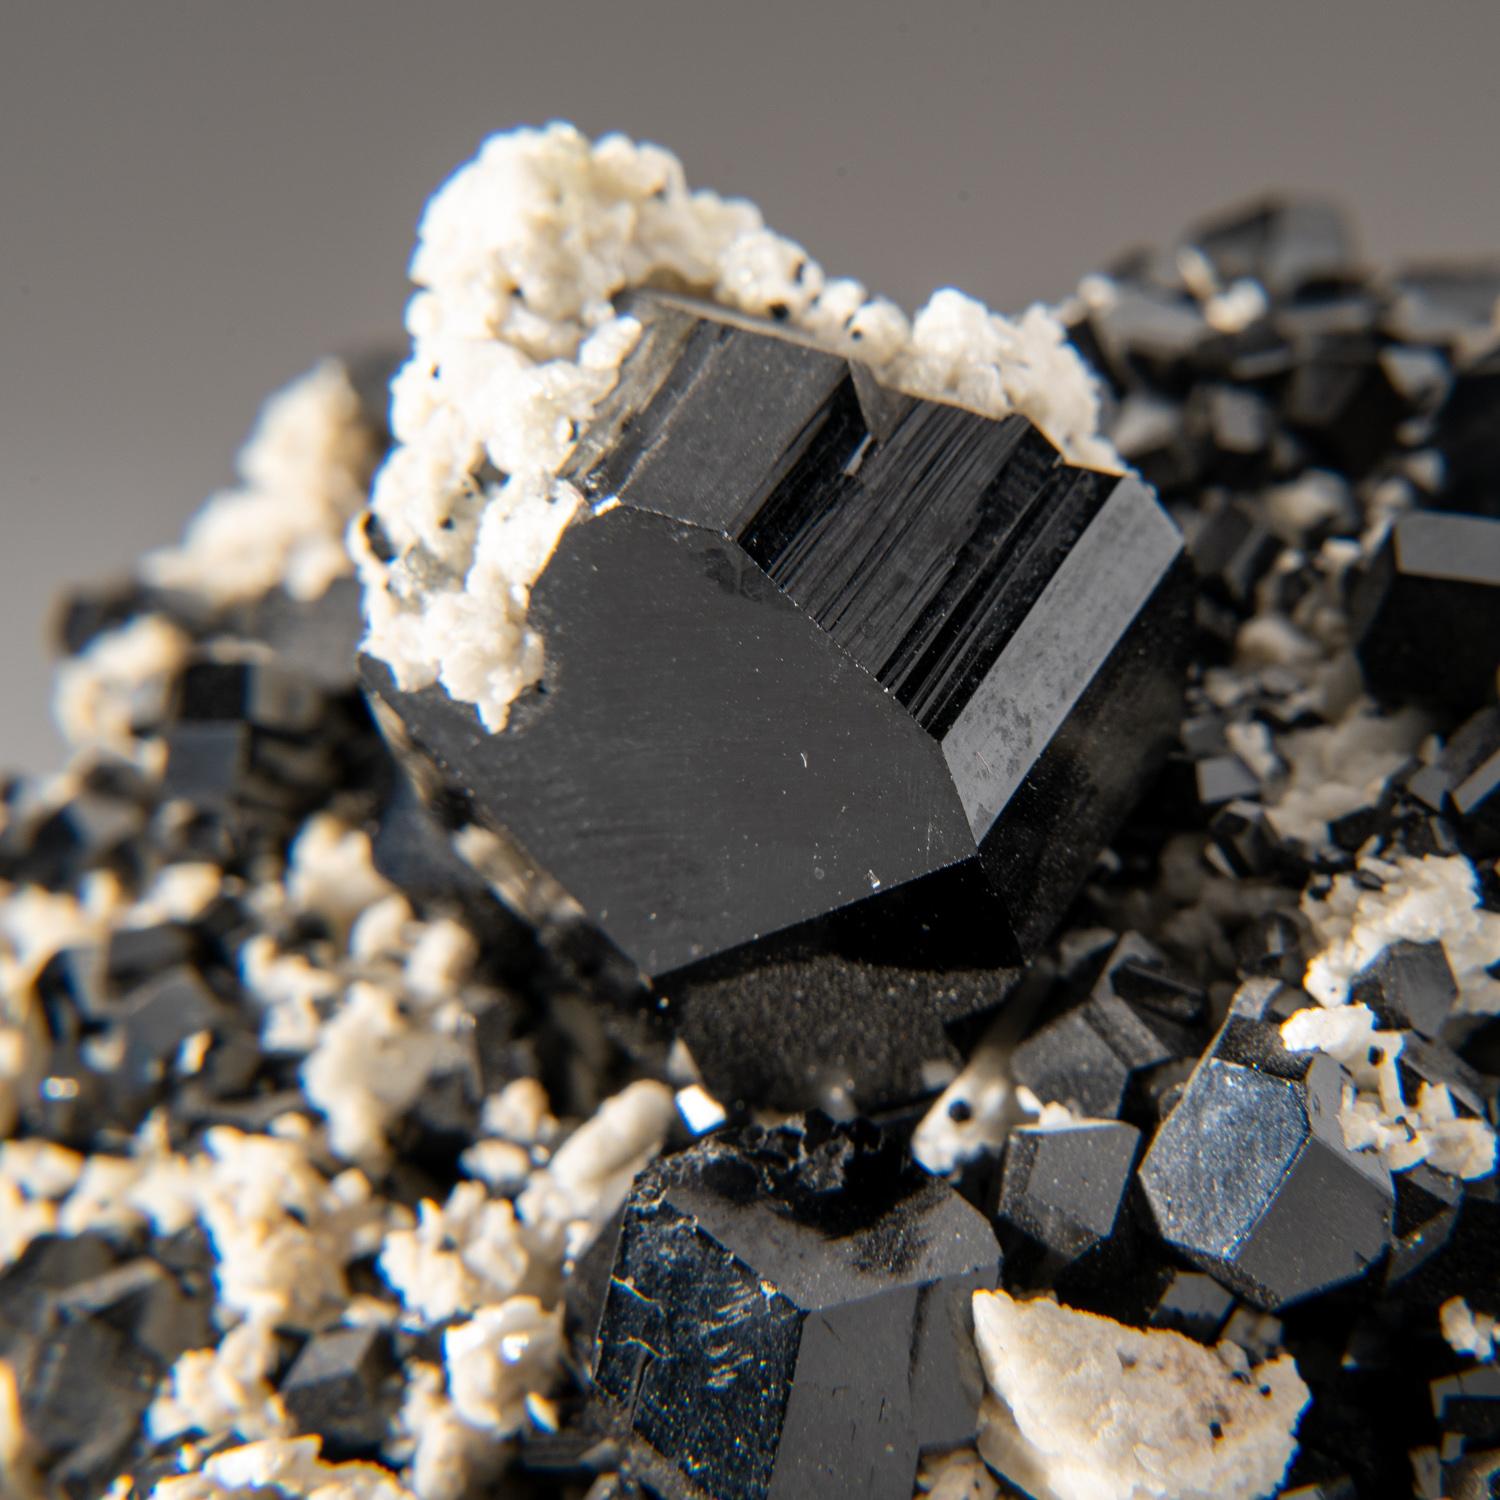 From Chhaqpu, Braldu Valley, Skardu District, Gilgit-Baltistan, Pakistan

Many interconnected crystals of black schorl tourmaline in  matrix of stark white albite. The tourmaline crystals with three-faced pyramidal terminations and striated prism